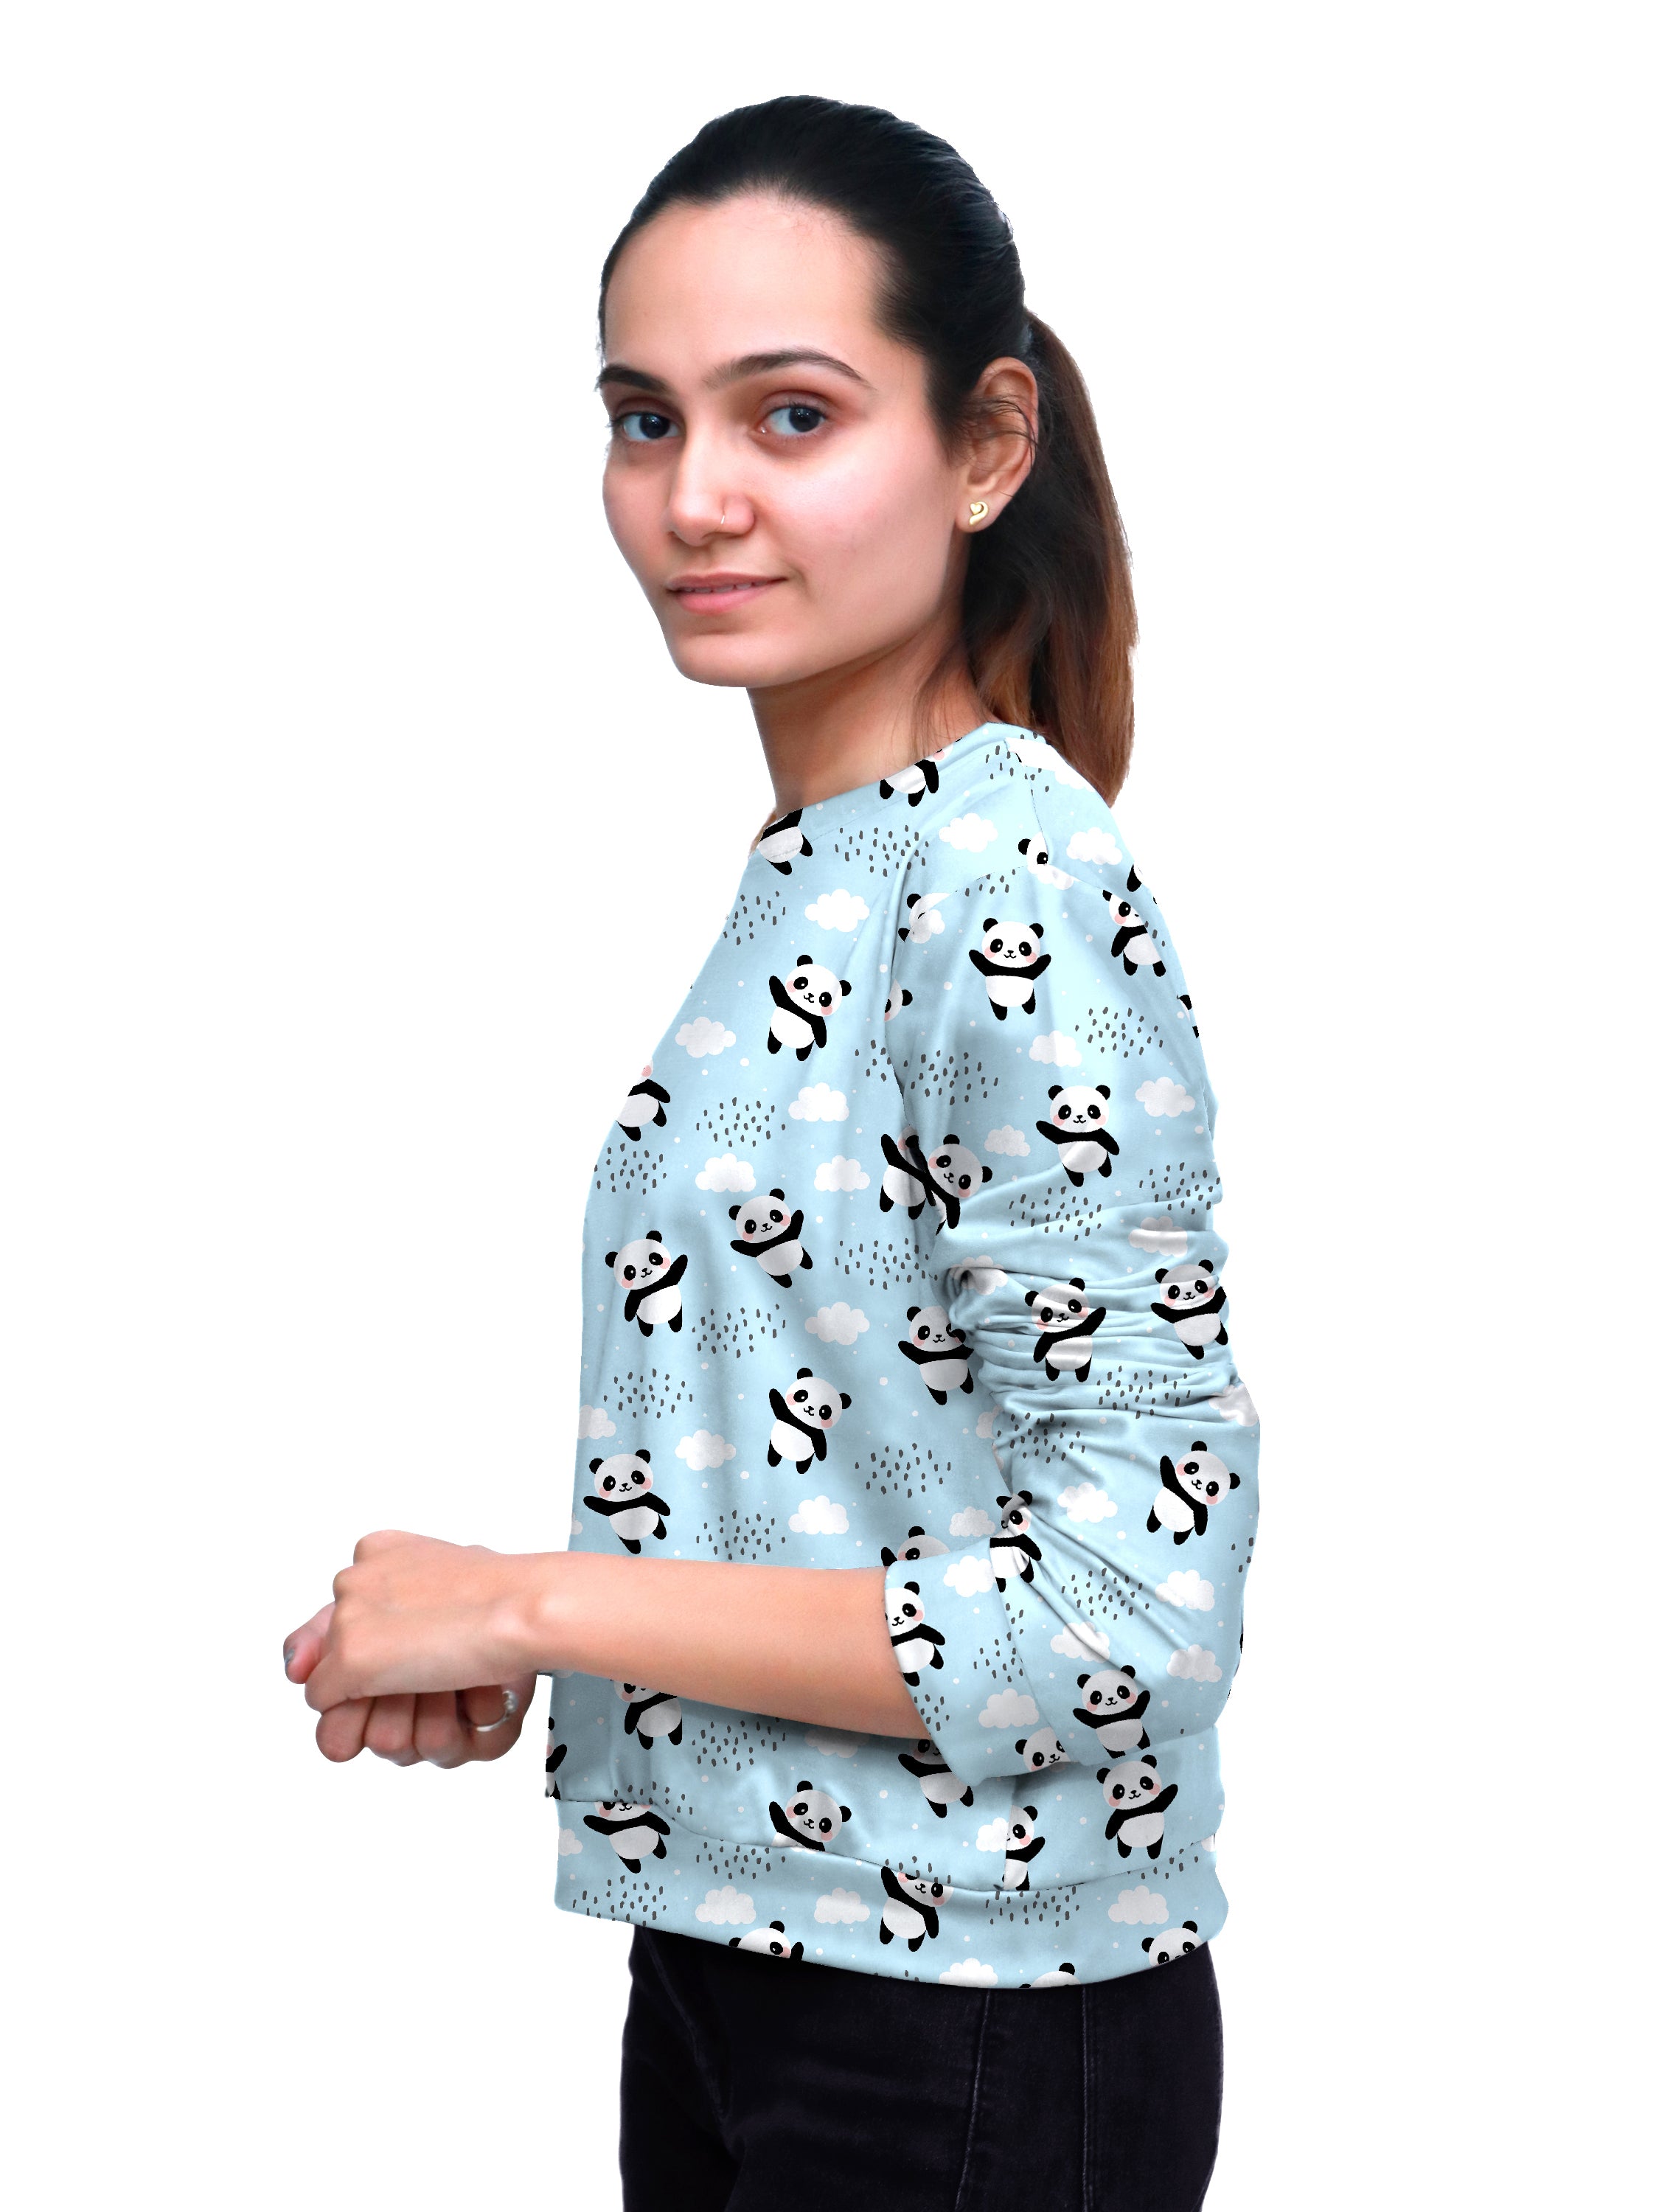 Light Sky-Blue Top With Panda Print for a Whimsical Touch